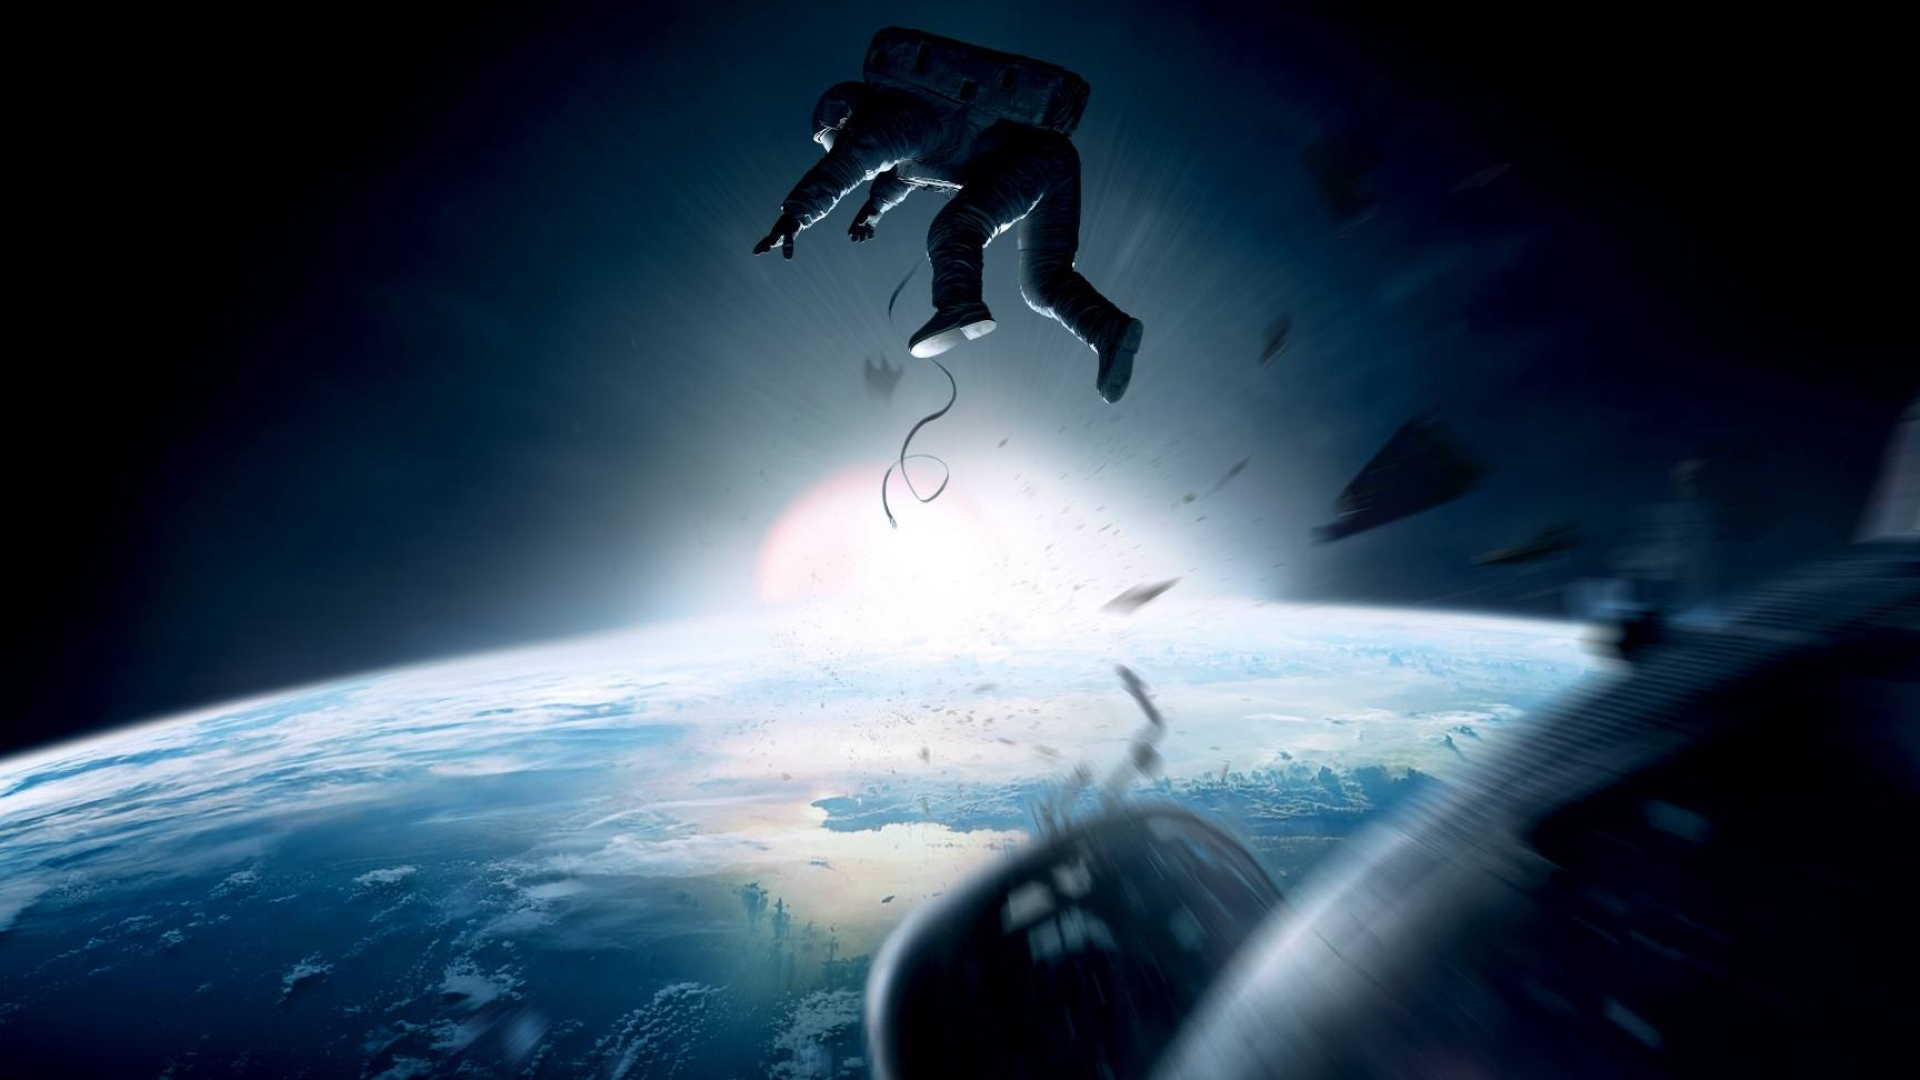 Gravity movie, Outer space, Astronaut survival, Gravitational pull, 1920x1080 Full HD Desktop